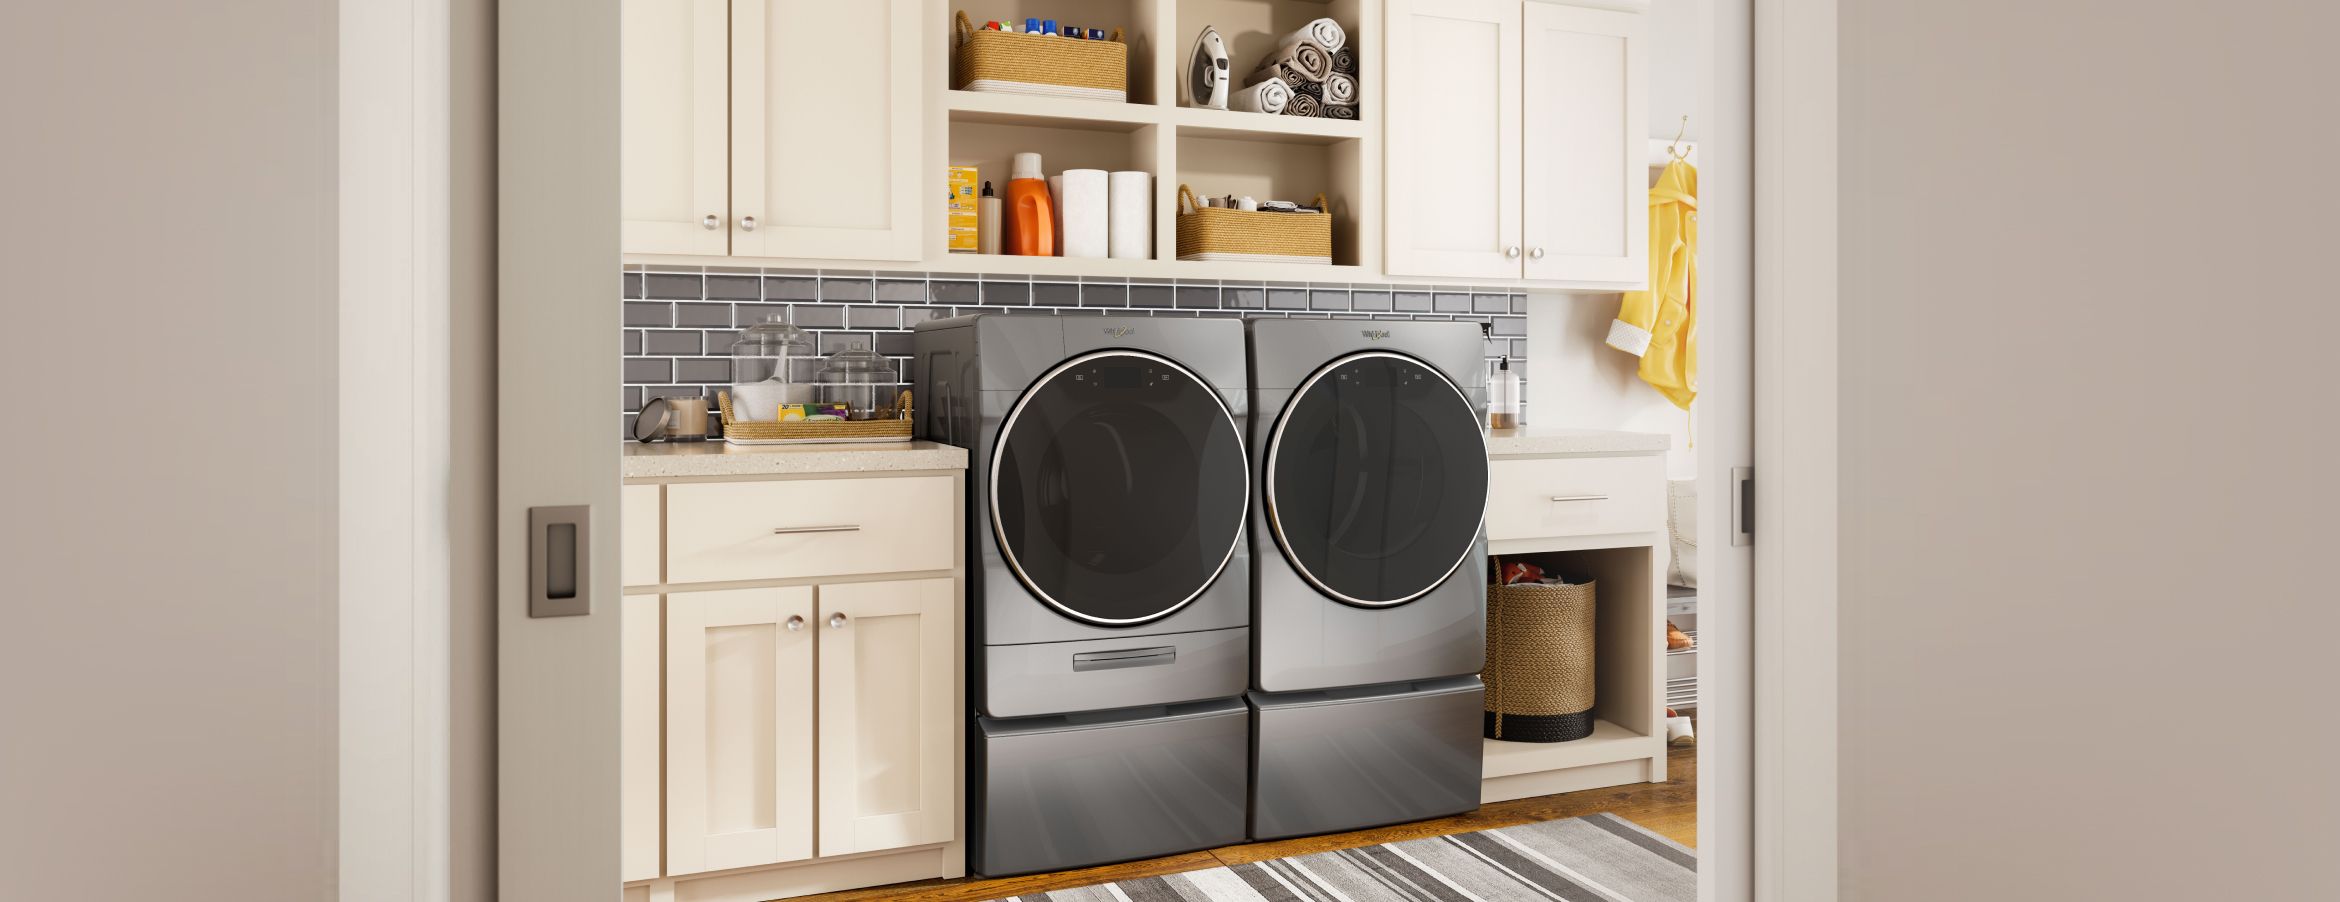 A Whirlpool washer and dryer in a modern laundry room.